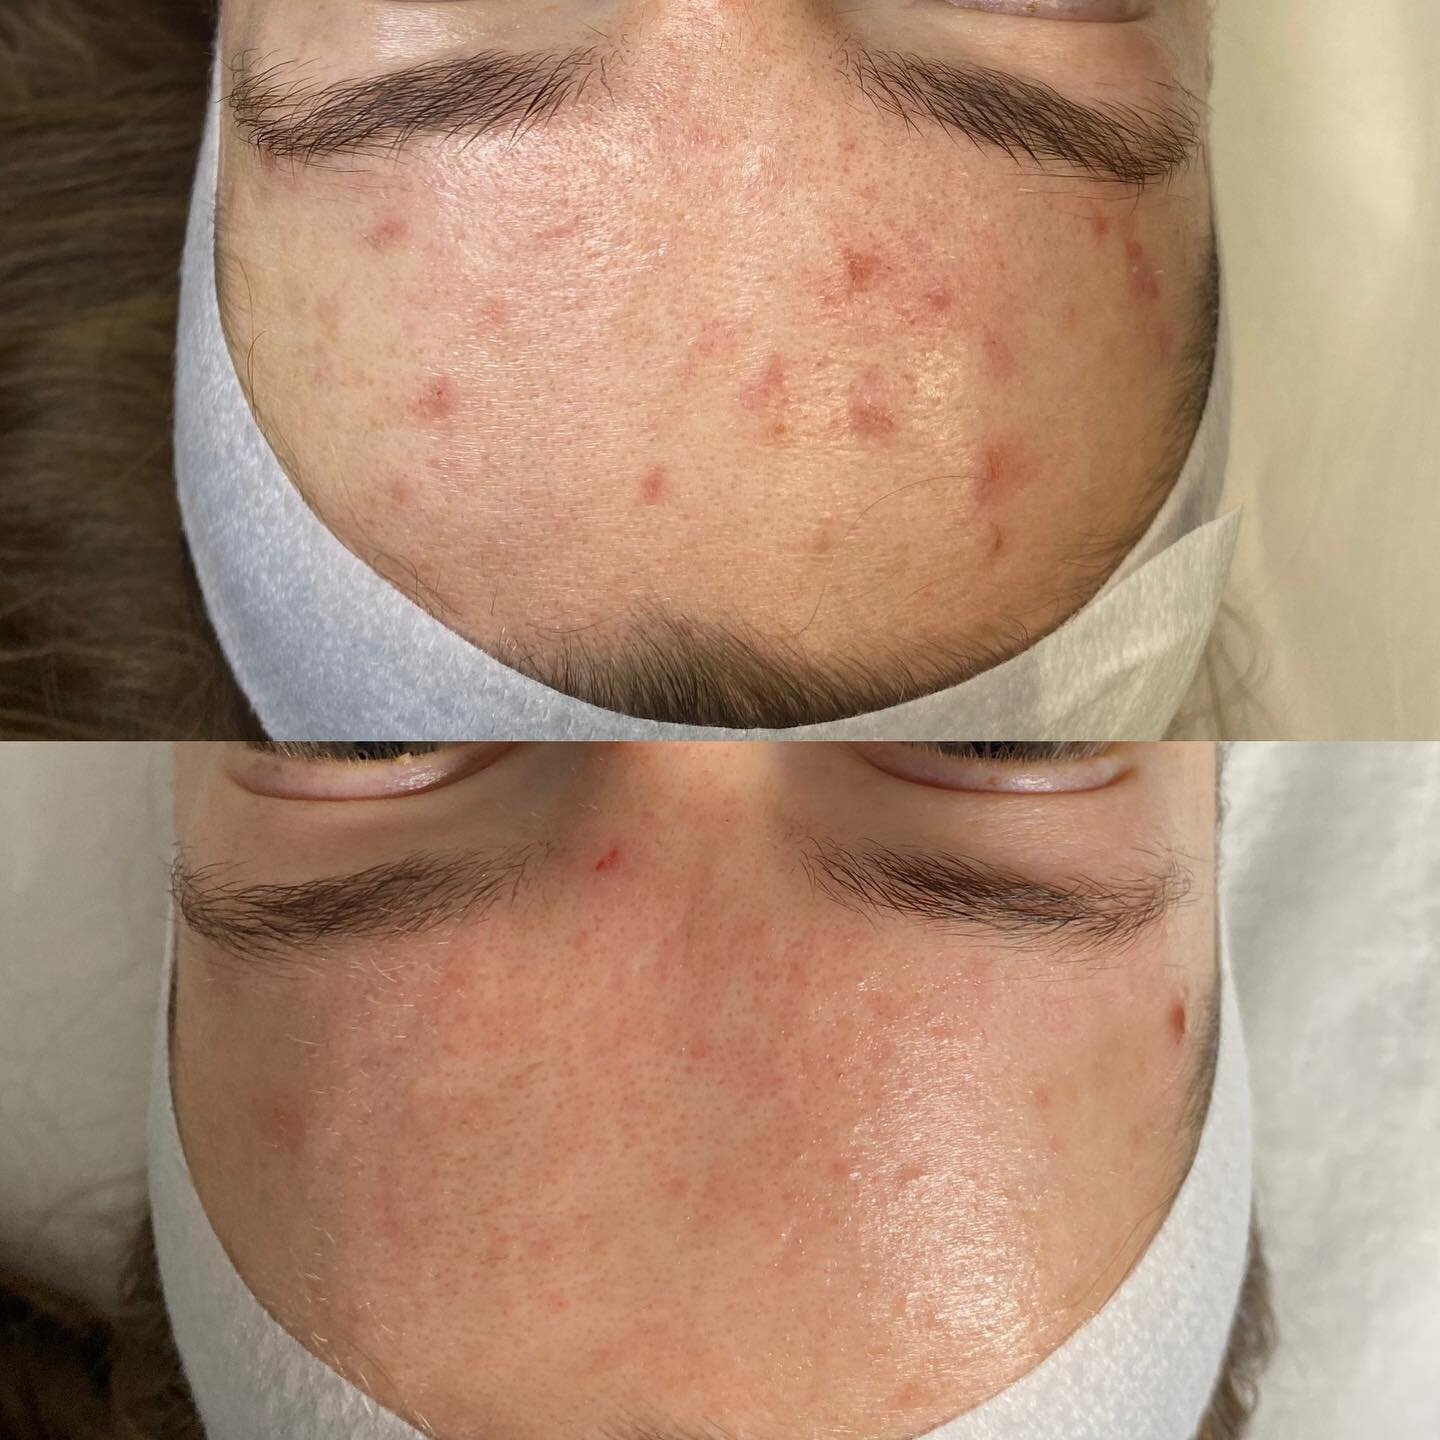 Before 💫 After - 2 WEEKS APART ⭐️ RESULTS After 1 ENZYME PEEL + LED treatment and using prescribed home care products. 

Stay tuned for more results over the coming weeks as we have just started the 6 WEEK BOOT CAMP! 

Whose ready to start their ski